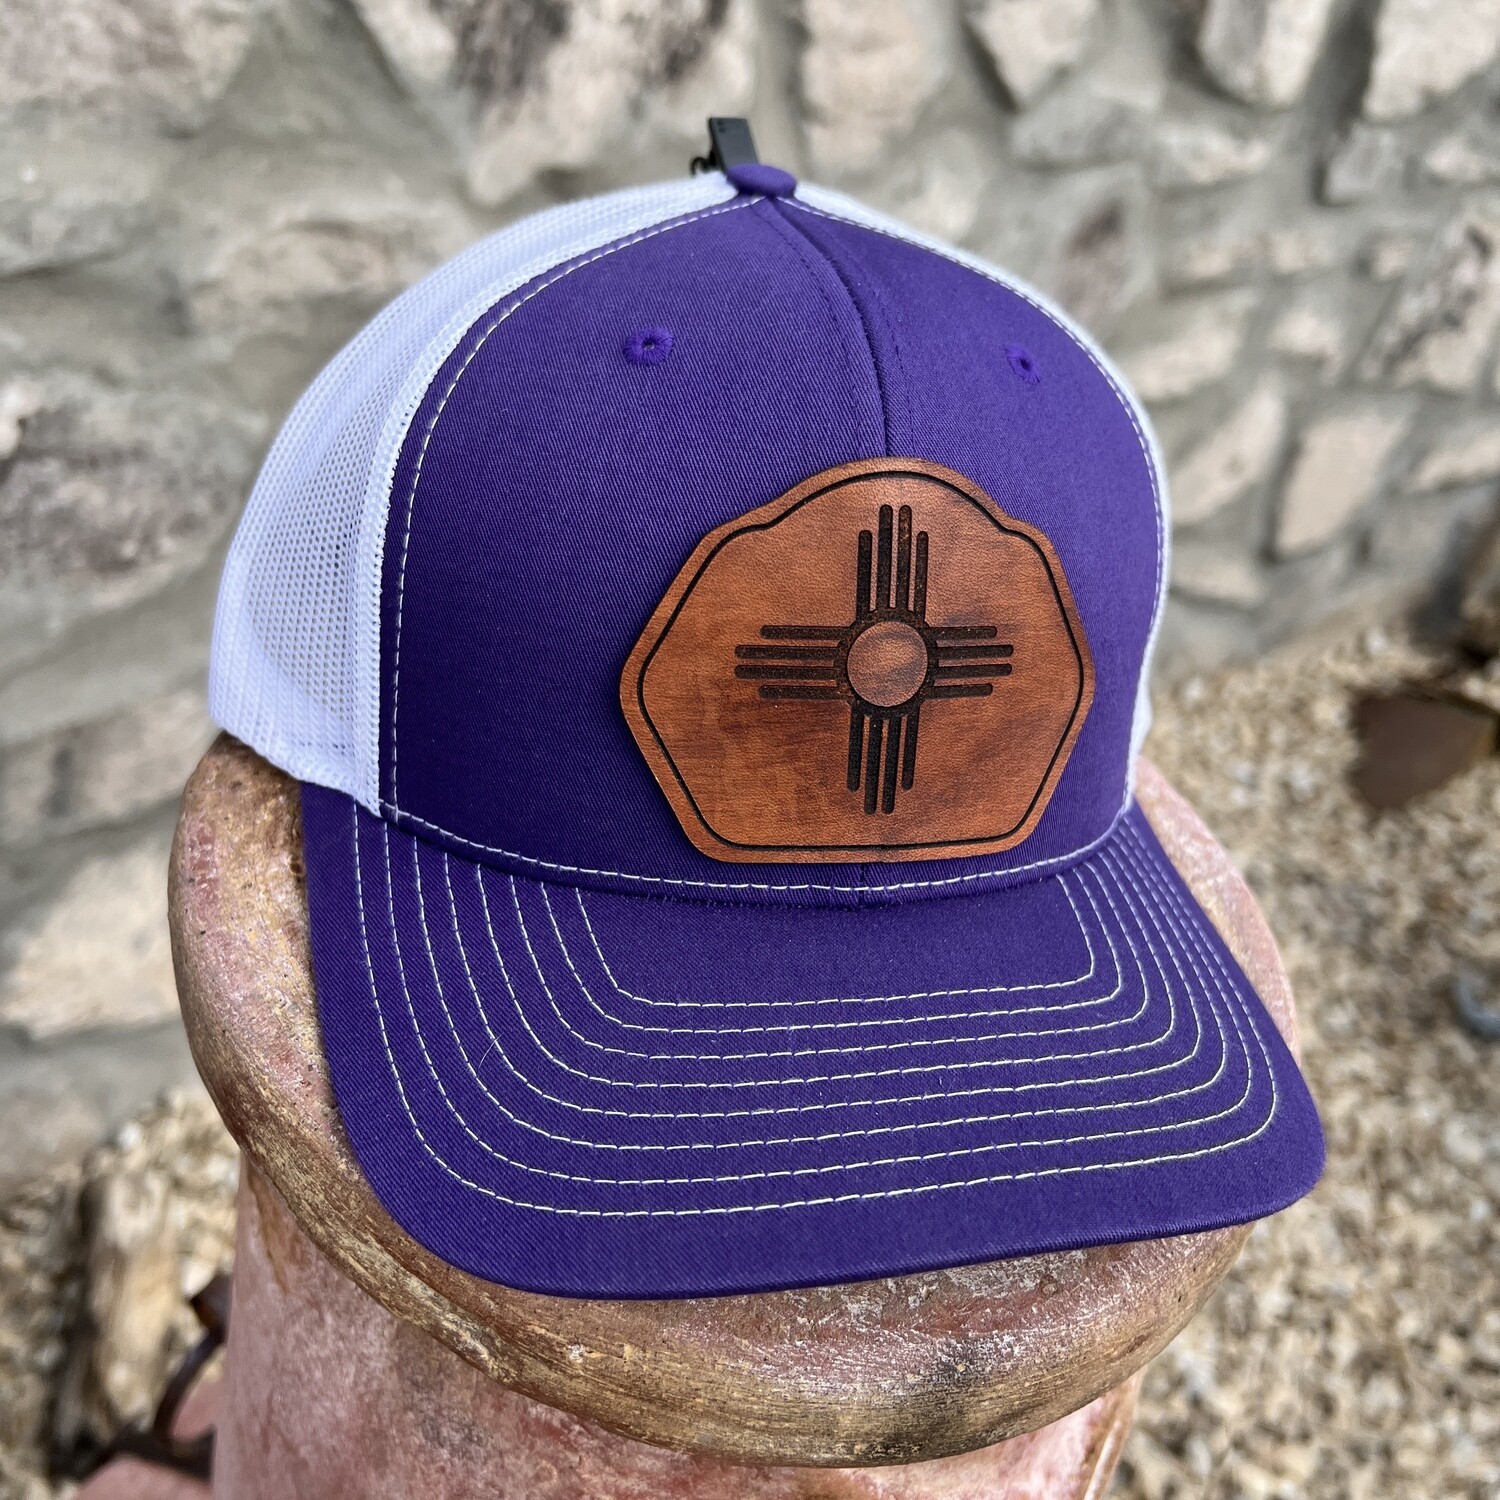 Richardson Snapback 112 With Leather Zia Patch -Purple/White